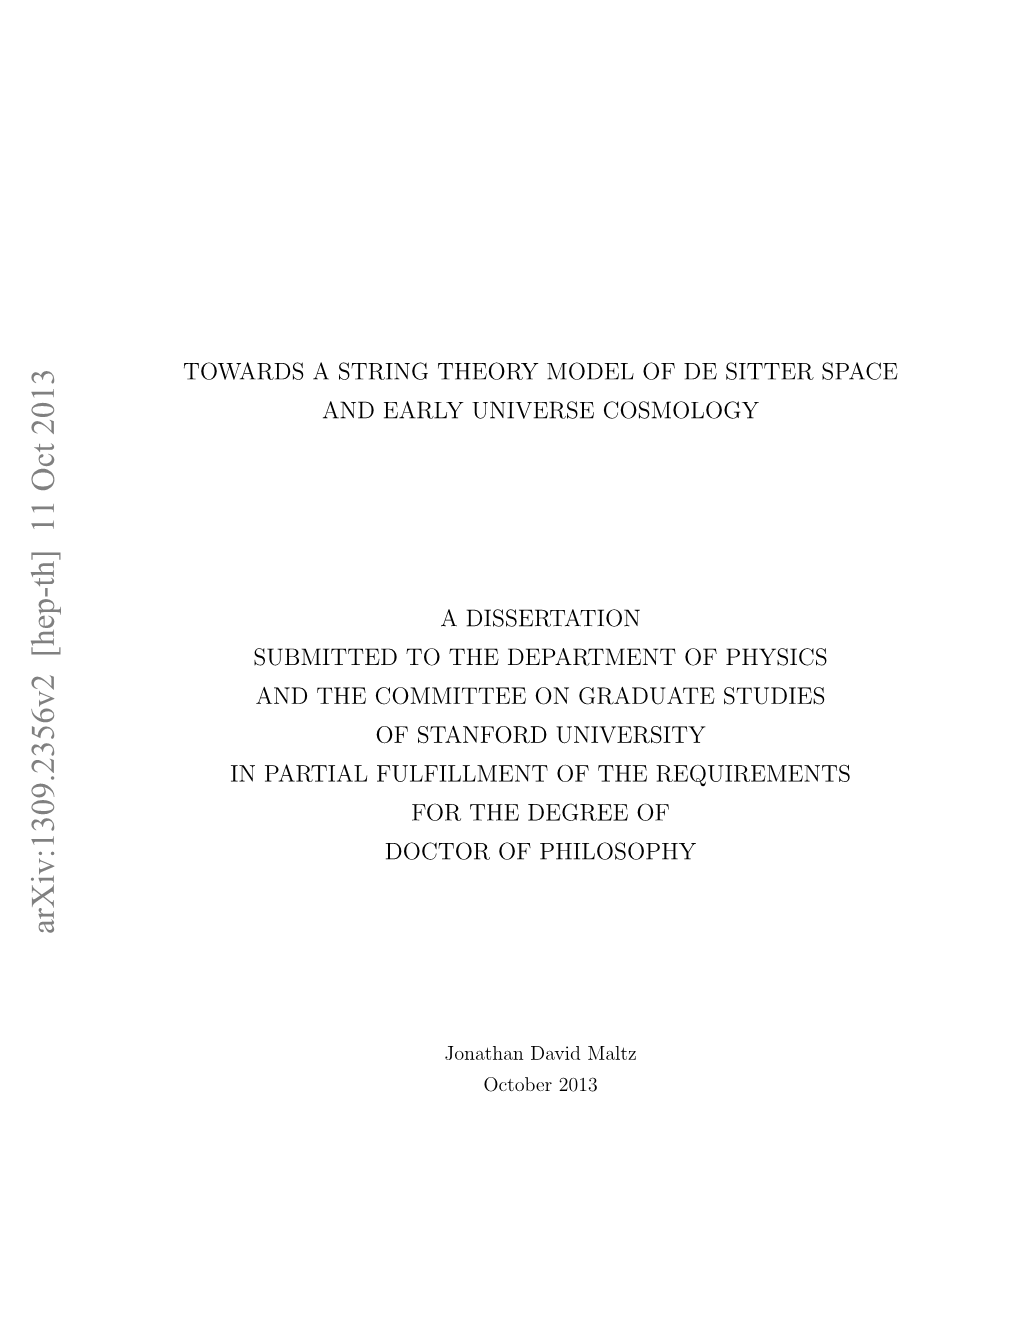 Towards String Theory Models of Desitter Space and Early Universe